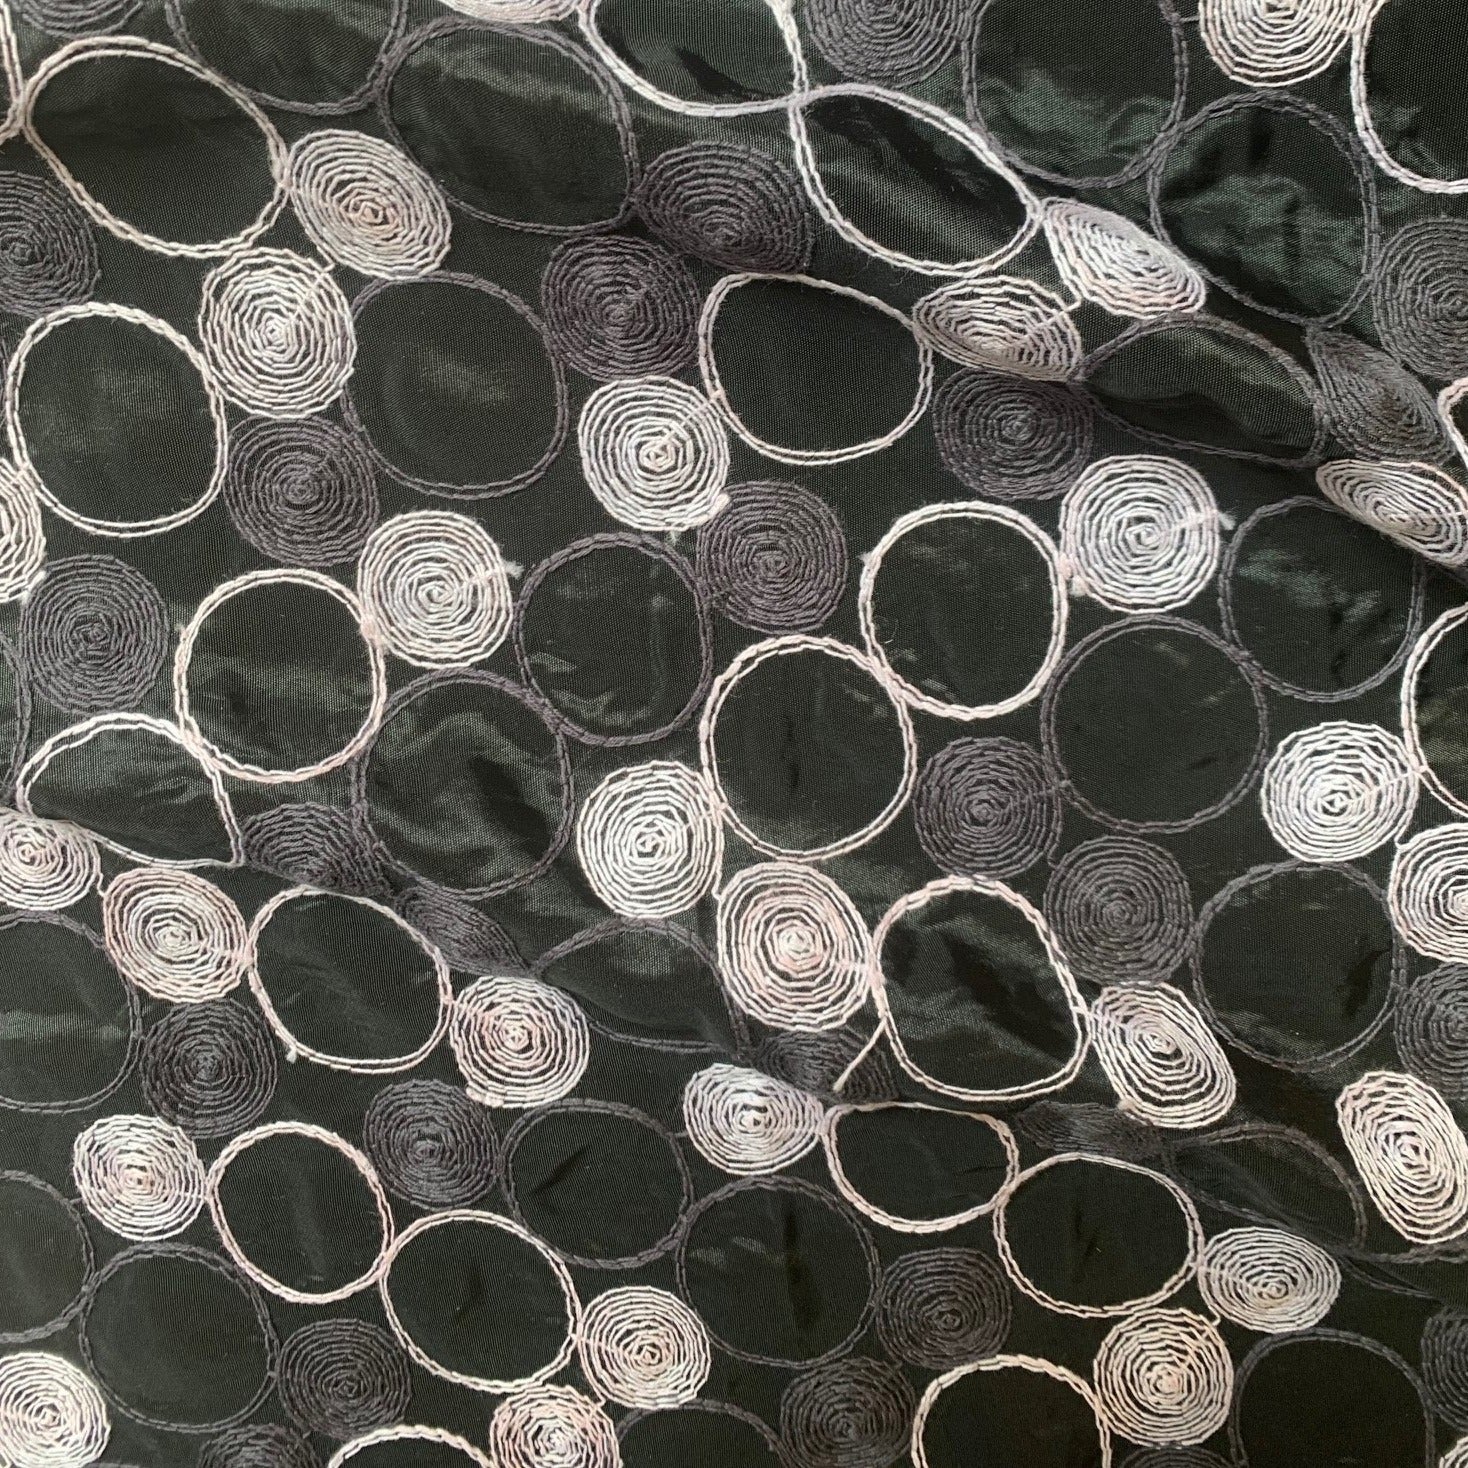 Displaying shabby featuring black colored geometric Circle embroidery on polyester and nylon taffeta with cool and crisp hand feel